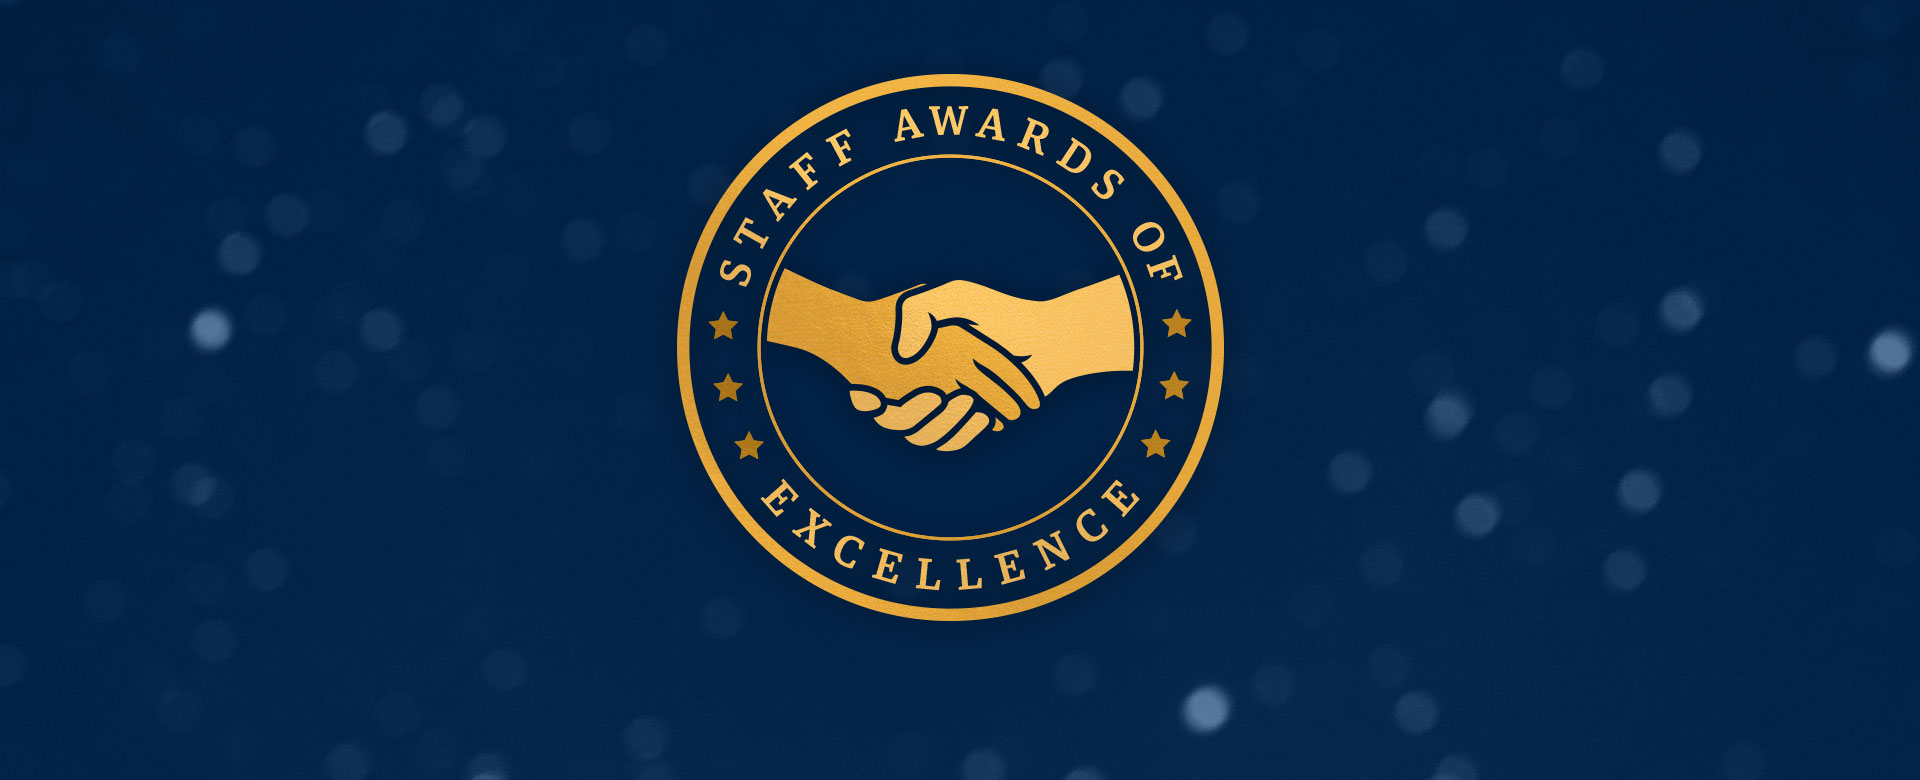 Staff Awards of Excellence